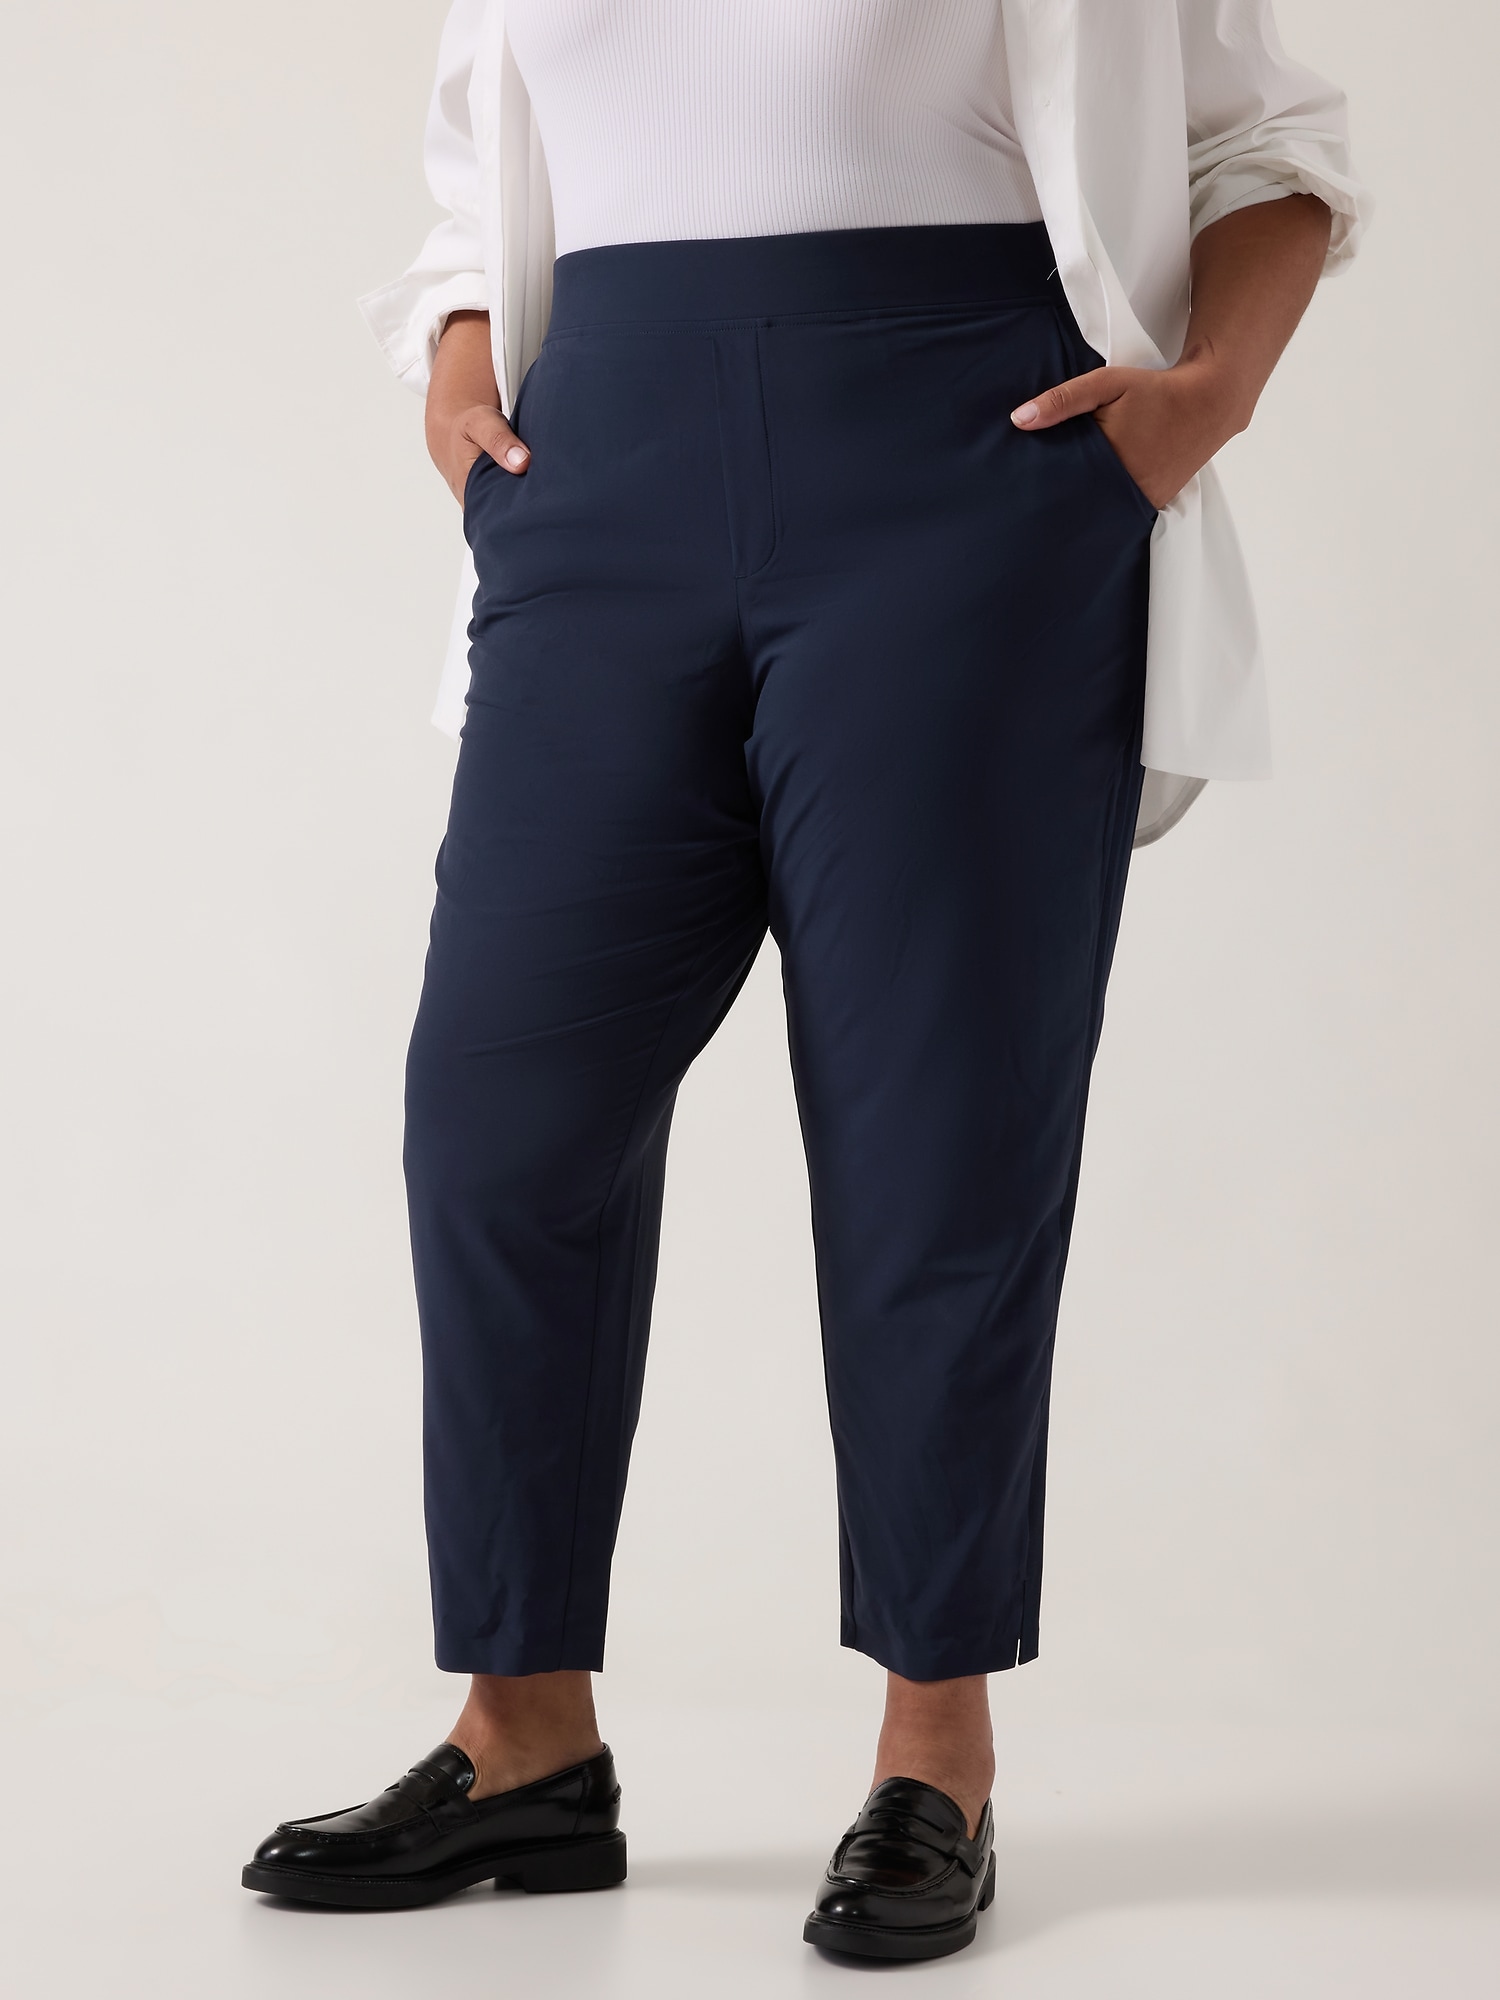 Athleta Brooklyn Mid Rise Ankle Pant In Navy